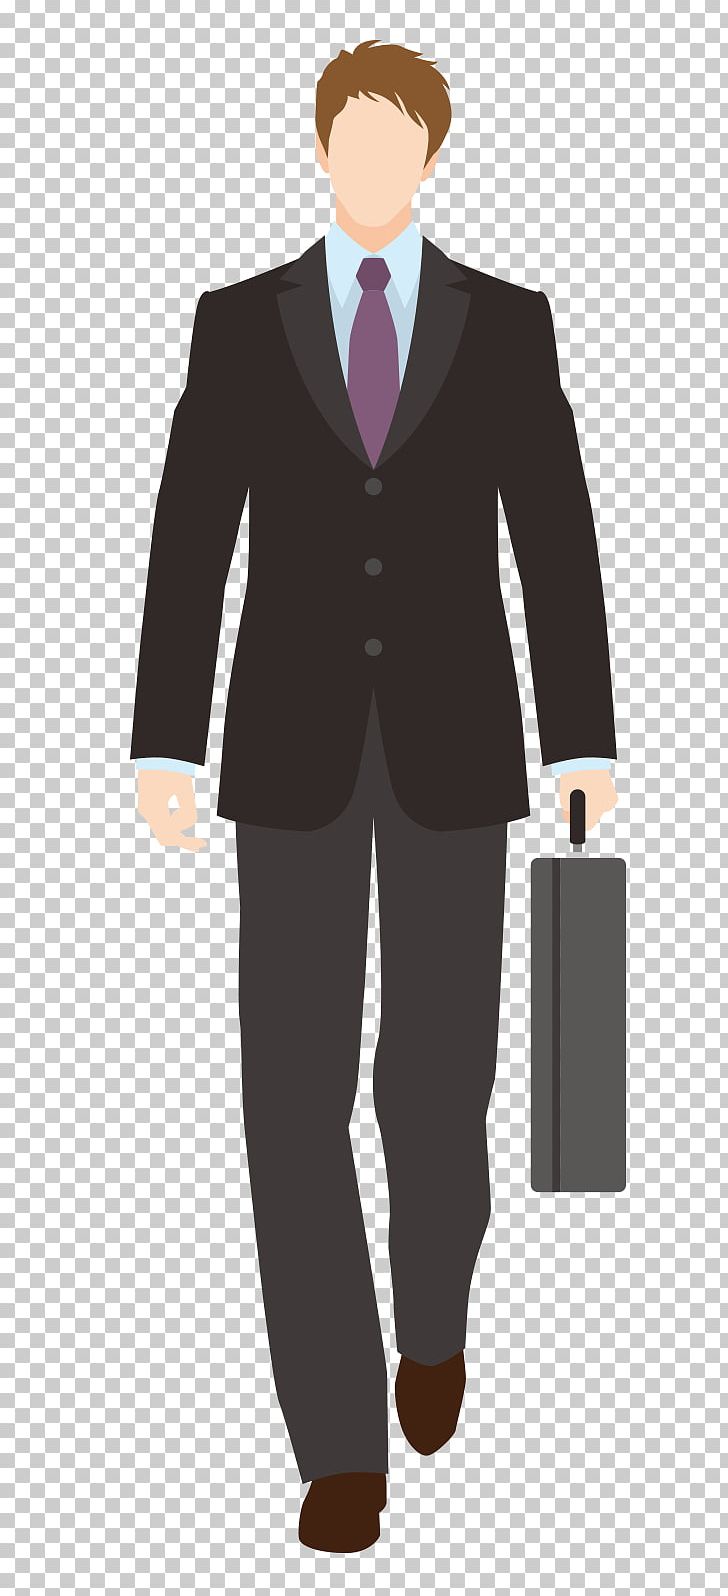 Suit Jacket Formal Wear Trousers Button PNG, Clipart, Business, Business  Man, Business Trip, Cartoon Characters, Company